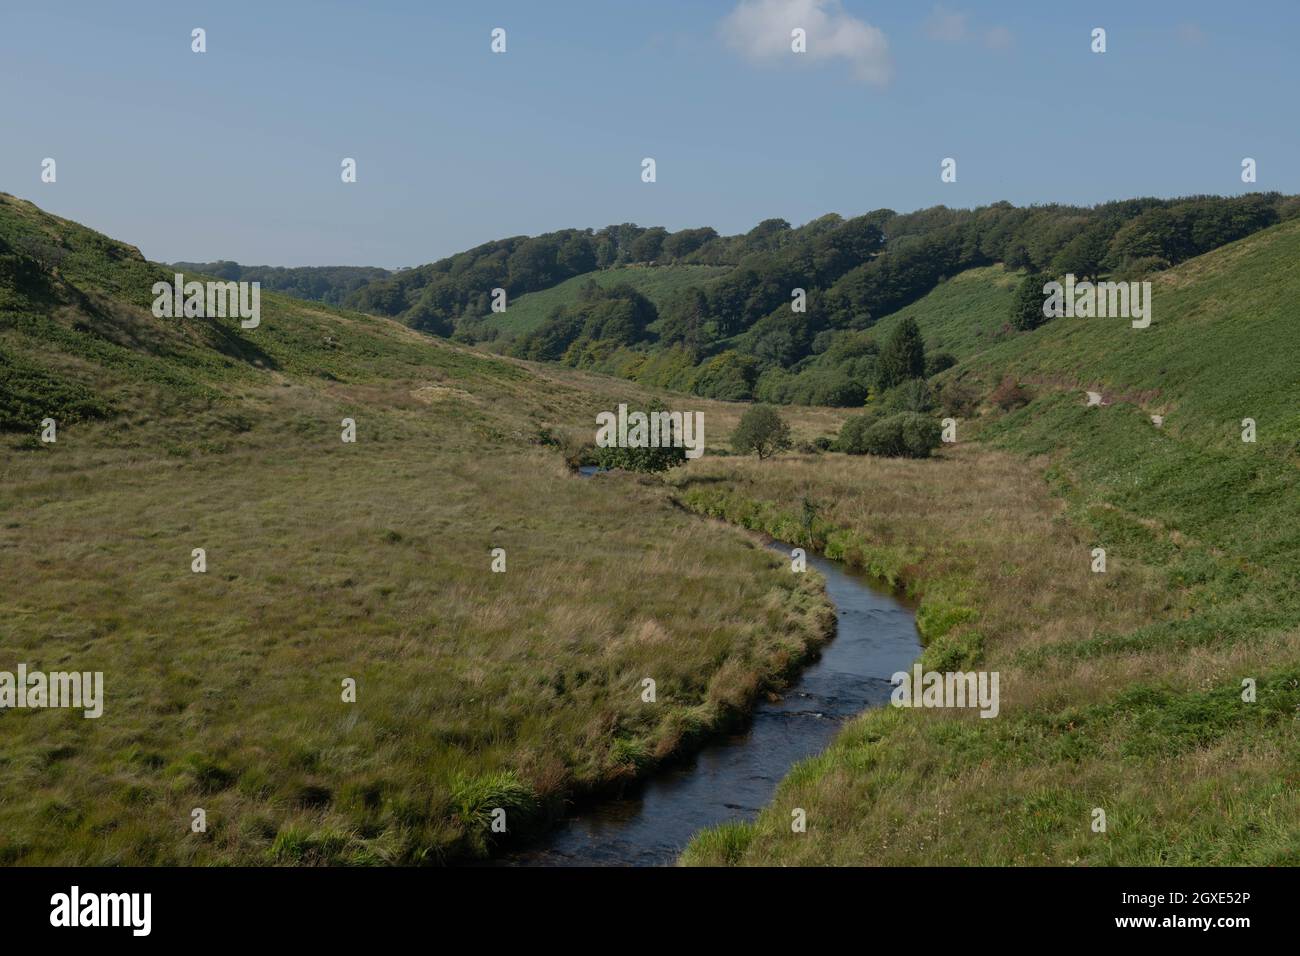 Summer Landscape of Moorland in the River Barle Valley within Exmoor National Park in the Rural Somerset Countryside, England, UK Stock Photo